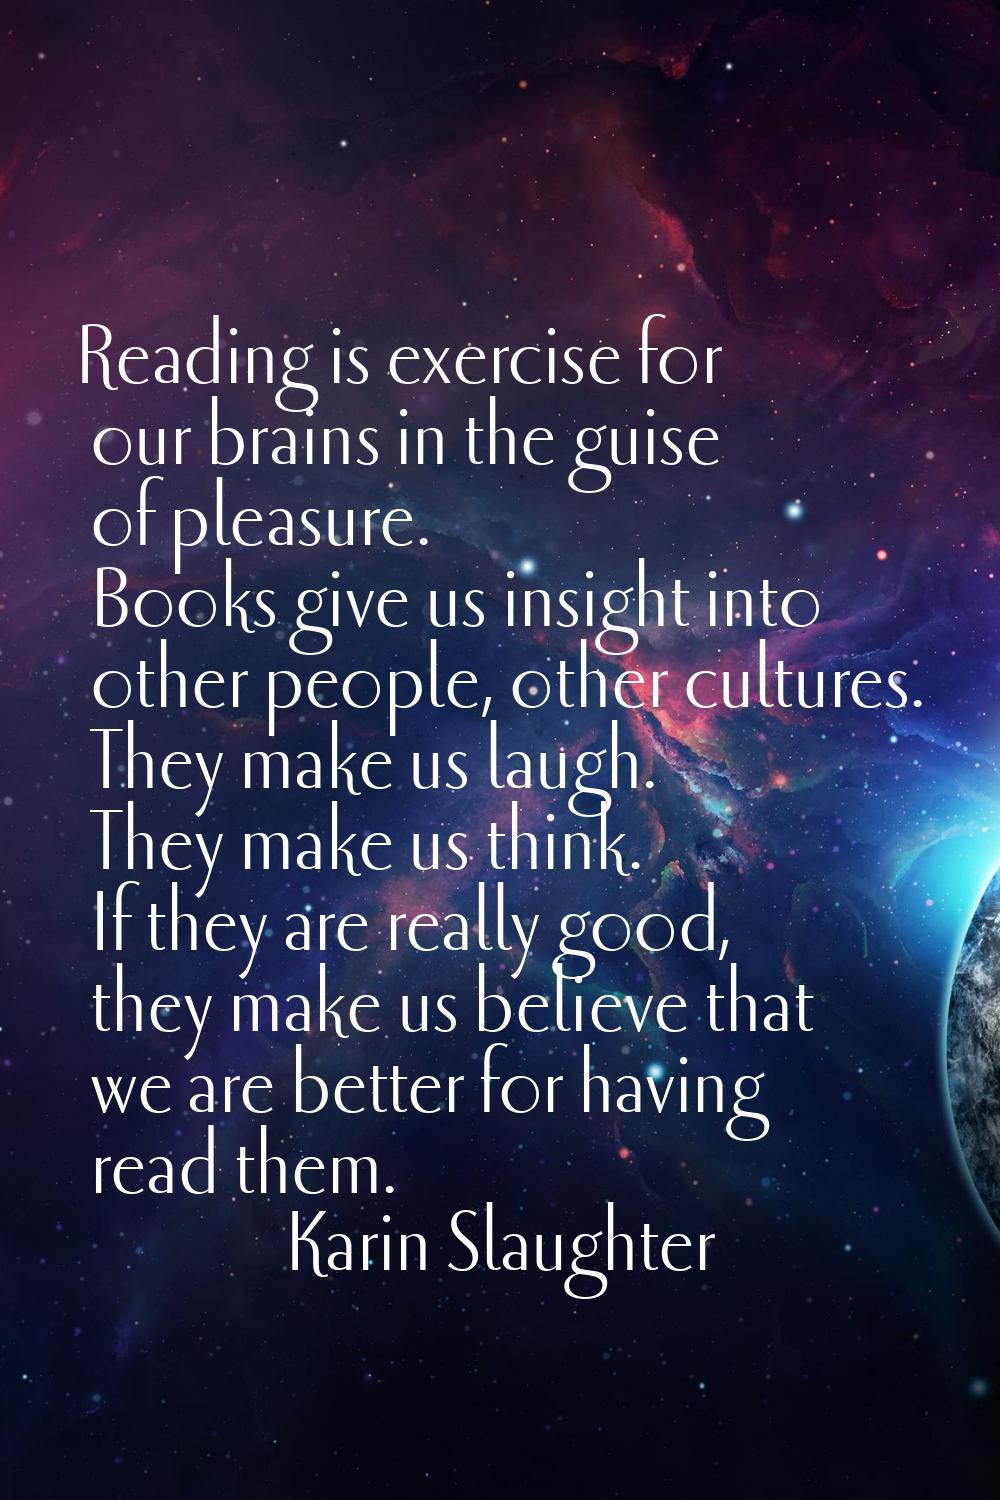 Reading is exercise for our brains in the guise of pleasure. Books give us insight into other peopl